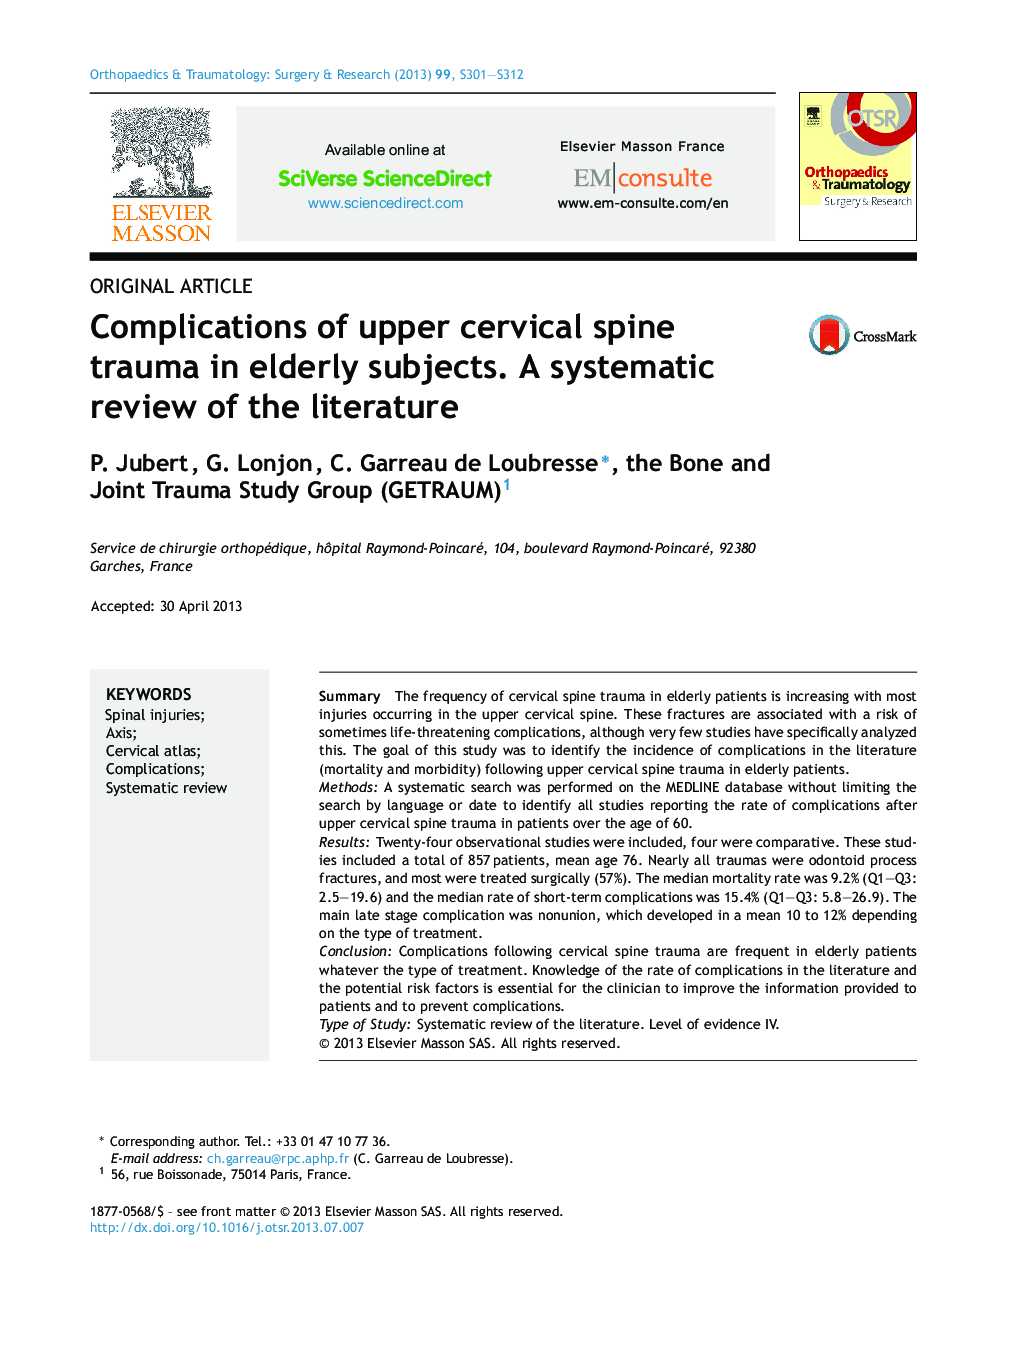 Complications of upper cervical spine trauma in elderly subjects. A systematic review of the literature